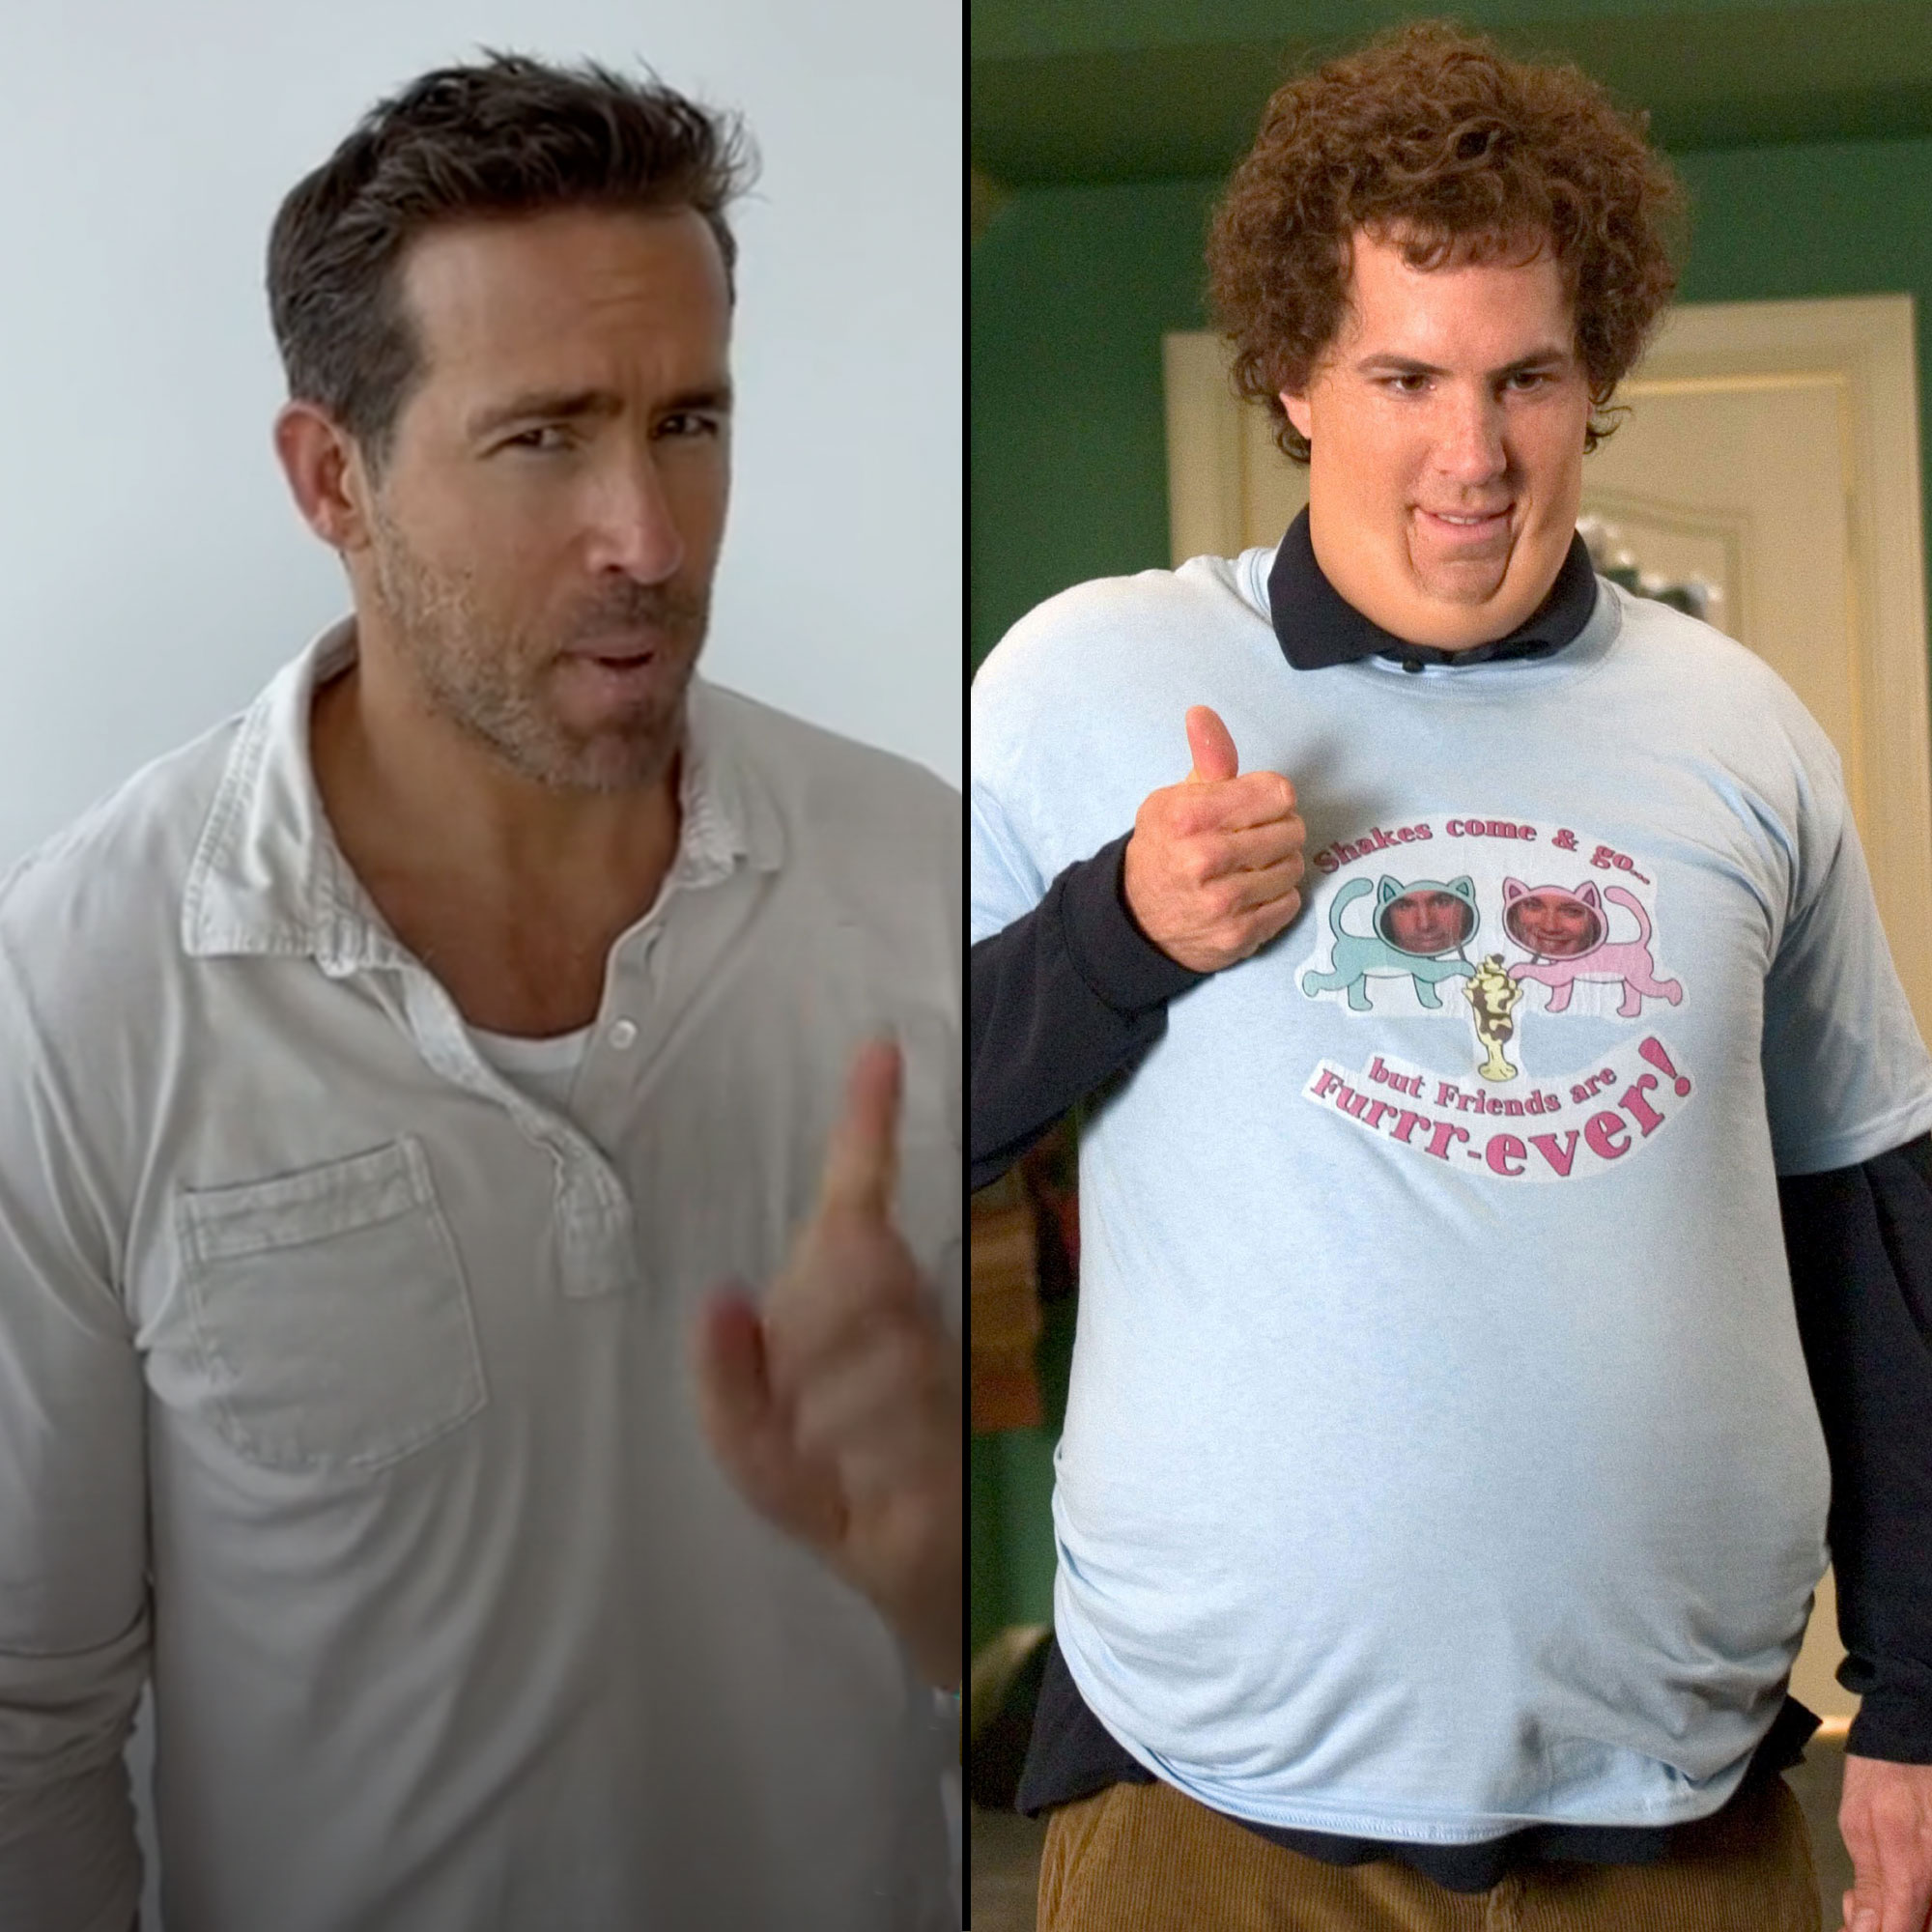 https://www.usmagazine.com/wp-content/uploads/2021/06/Ryan-Reynolds-Recreates-Just-Friends-Scene-He-Joins-TikTiok-Jokes-You-Will-Be-Disappointed-By-His-Account.jpg?quality=82&strip=all